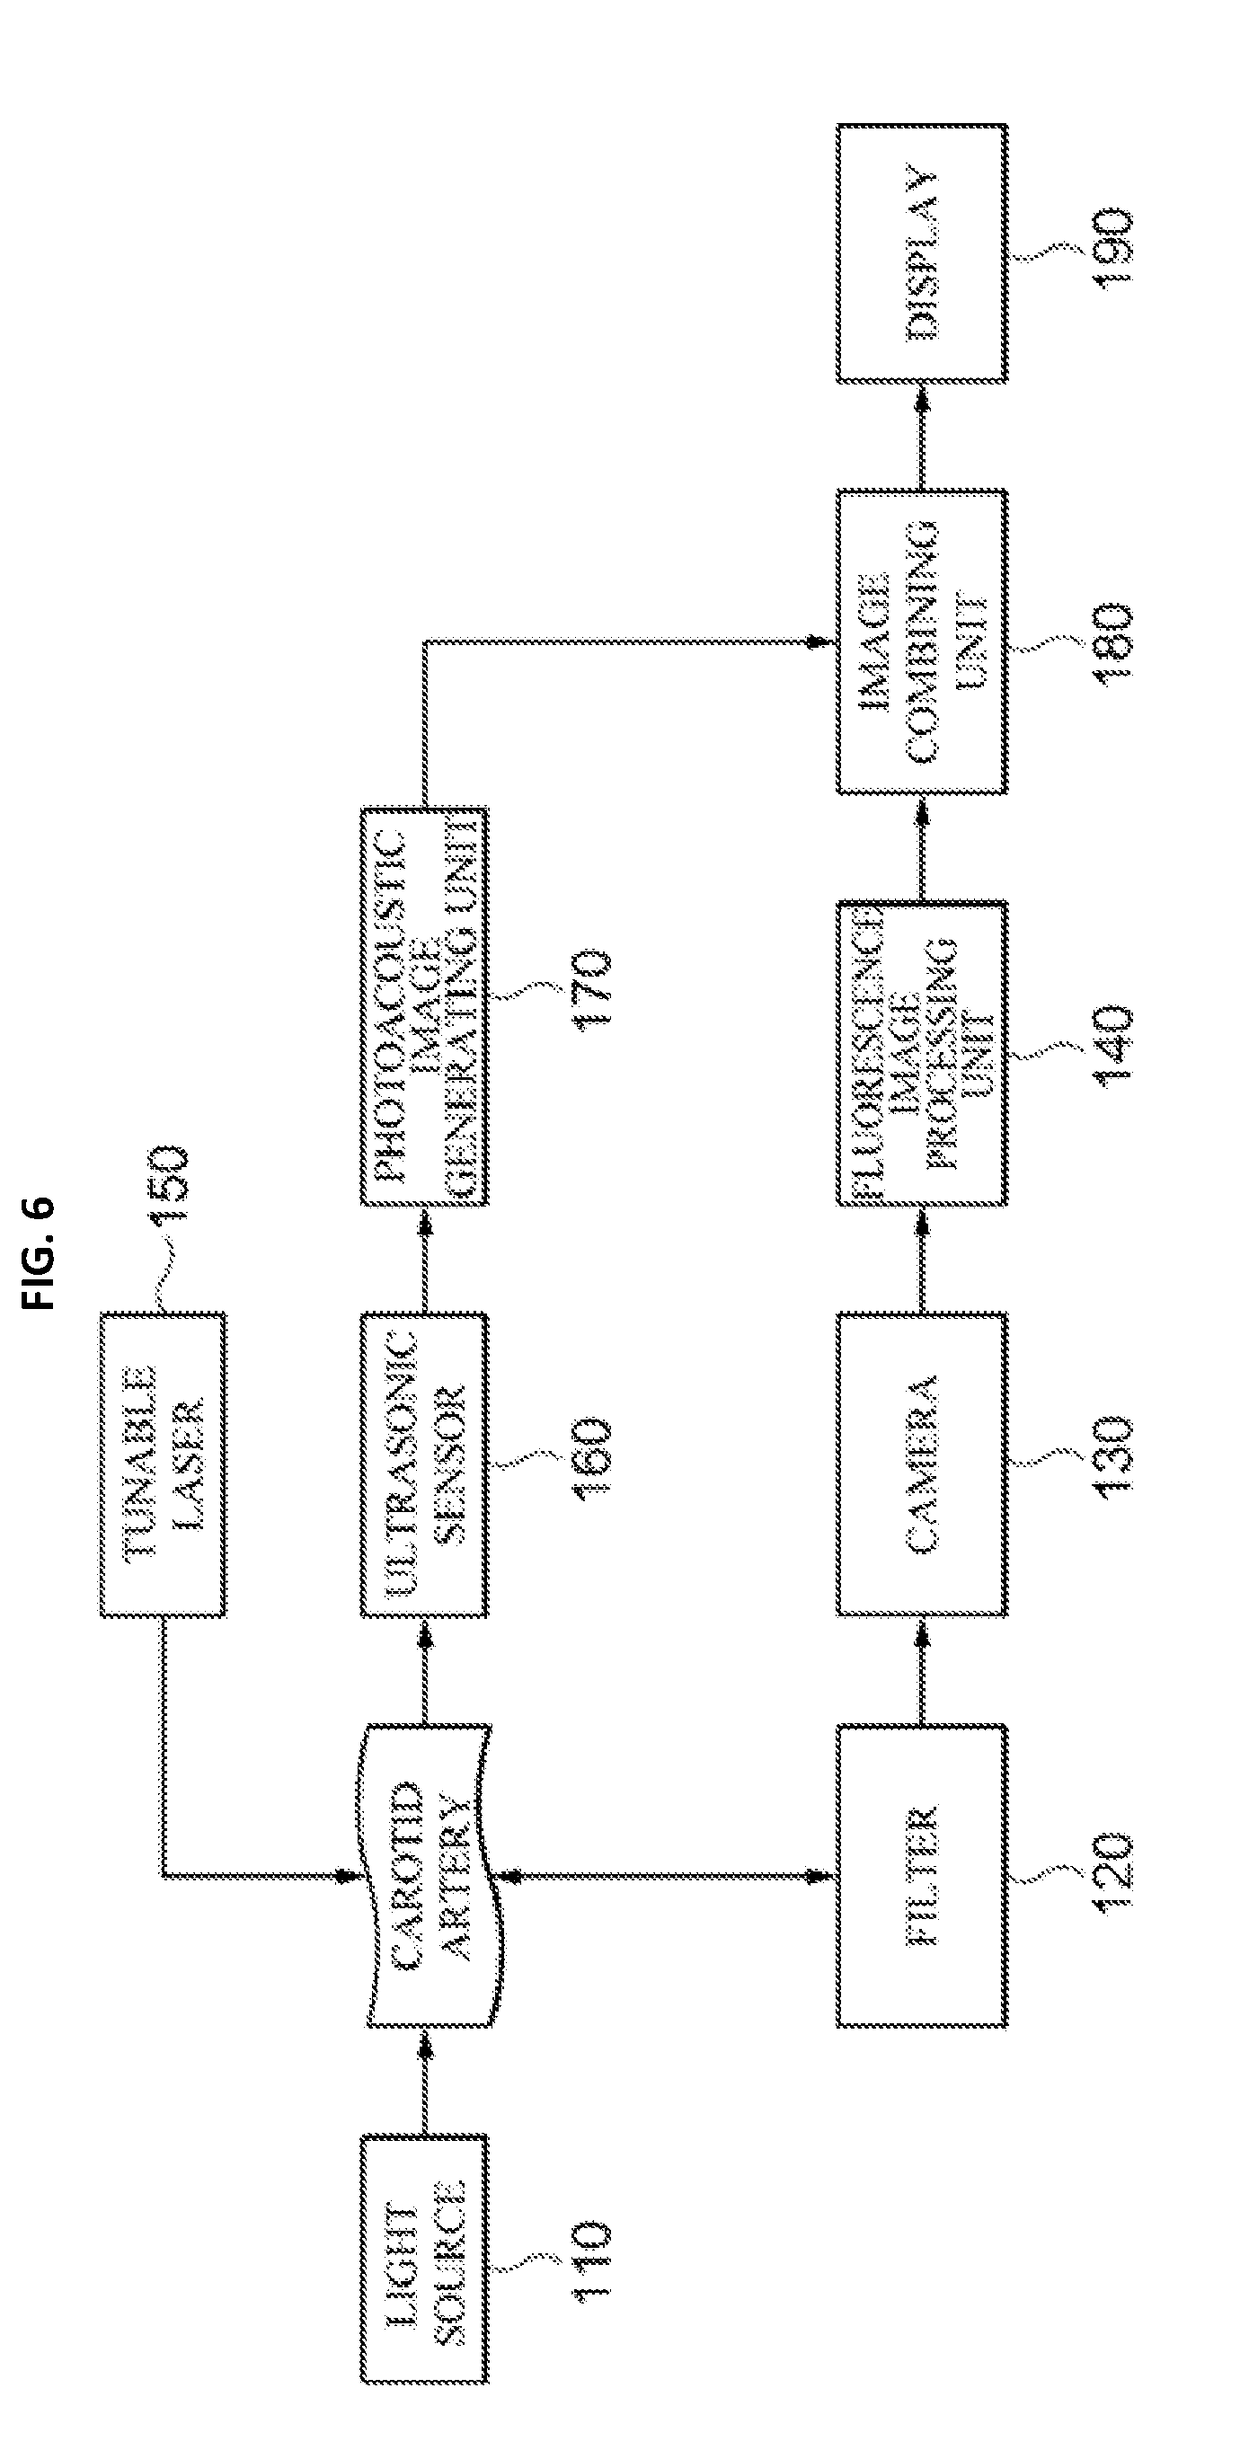 Fluorescent imaging device for plaque monitoring and multi-imaging system using same